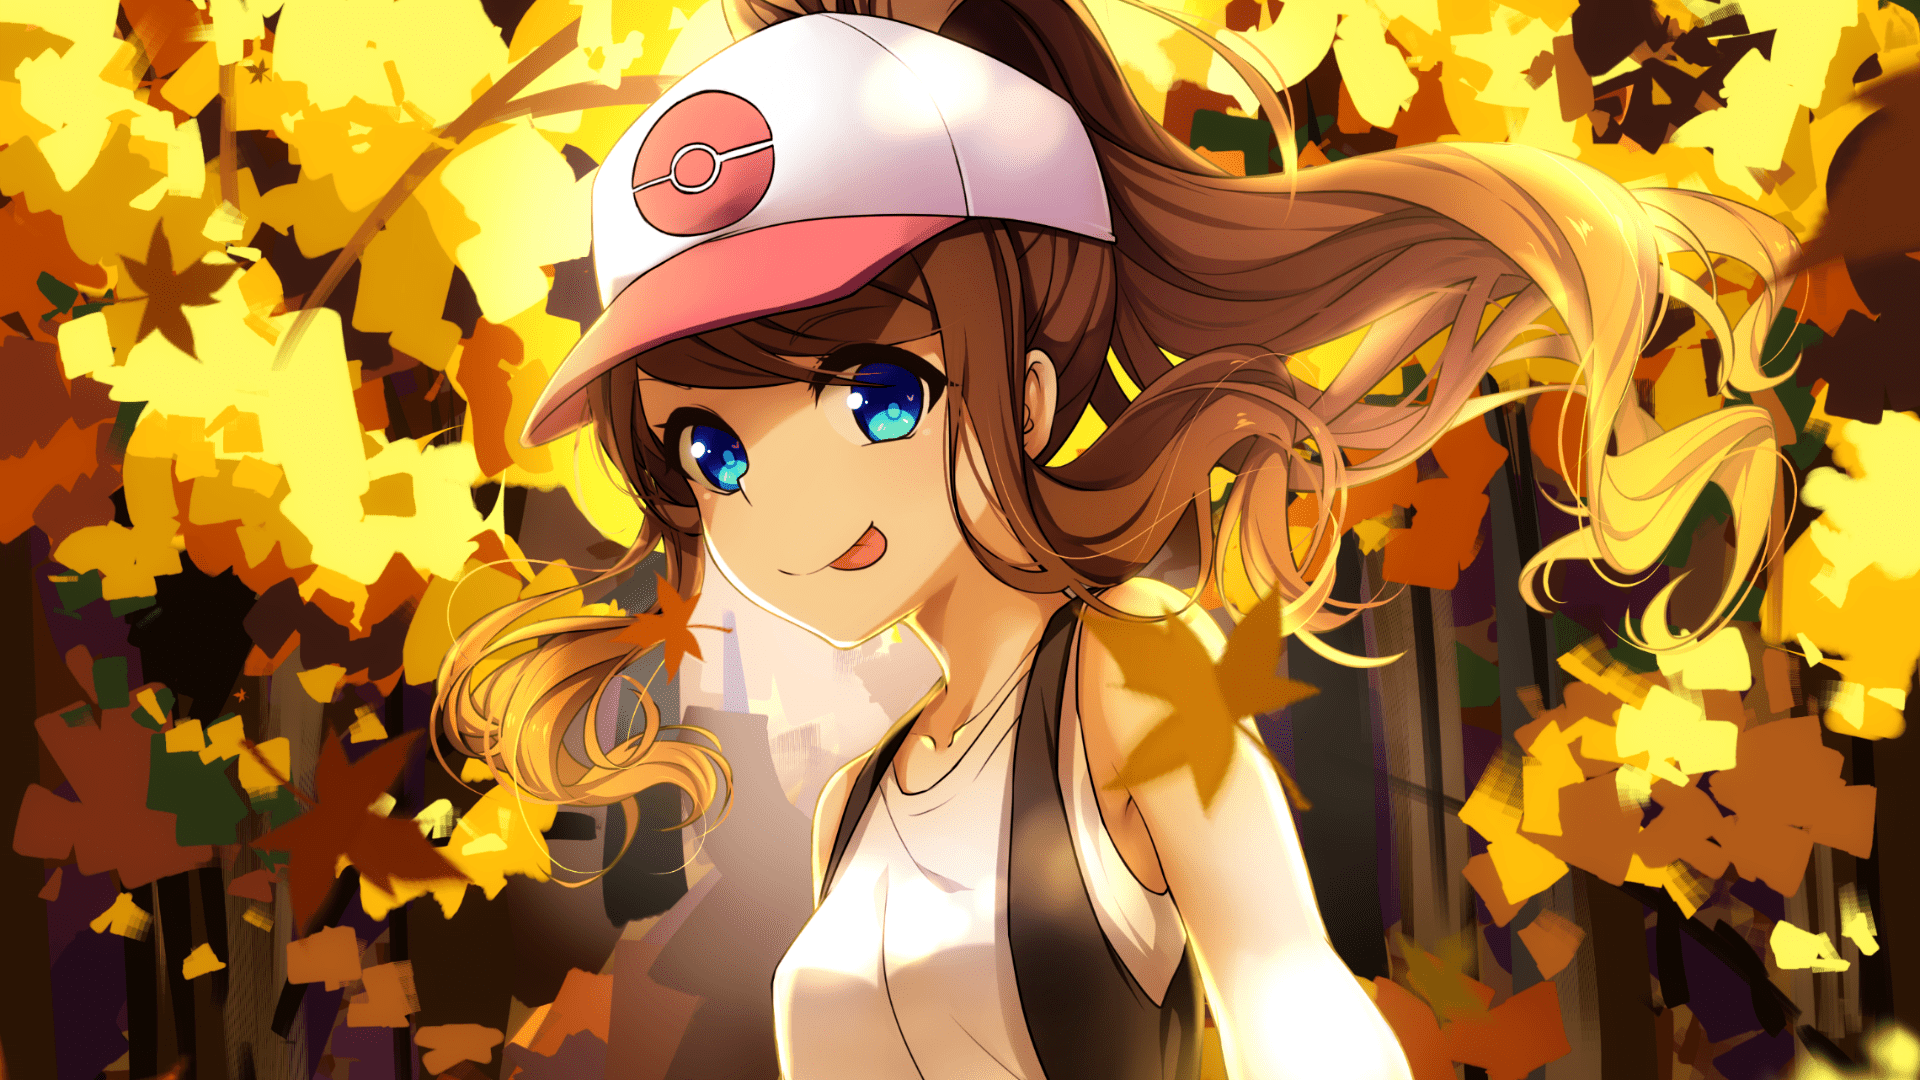 Female Pokemon Trainer Wallpapers - Top Free Female Pokemon Trainer ...